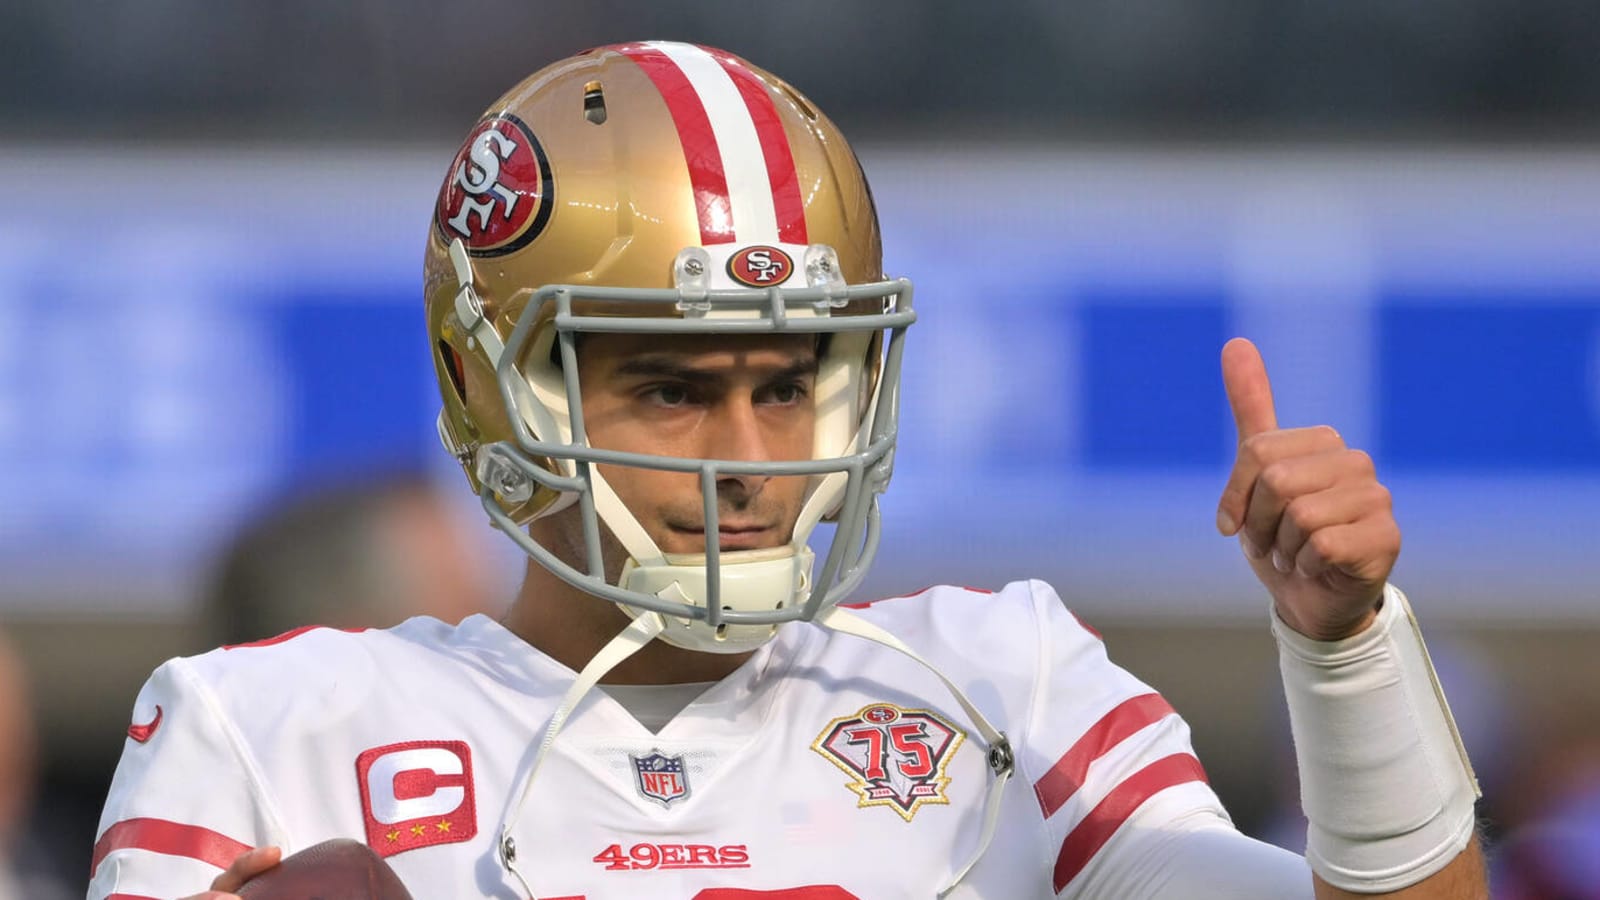 Report: 49ers give Jimmy Garoppolo permission to seek trade